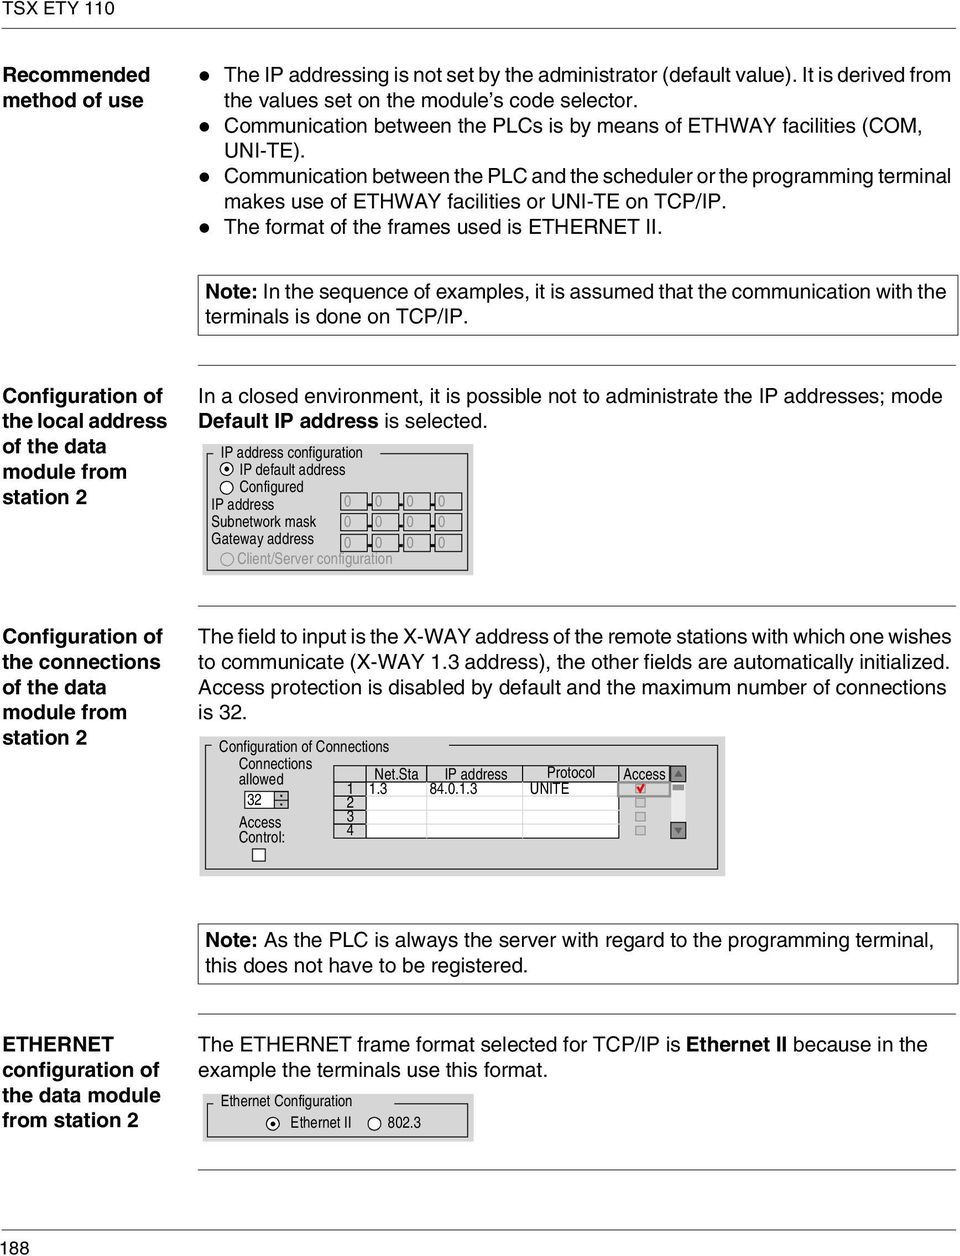 l Communication between the PLC and the scheduler or the programming terminal makes use of ETHWAY facilities or UNI-TE on TCP/IP. l The format of the frames used is ETHERNET II.